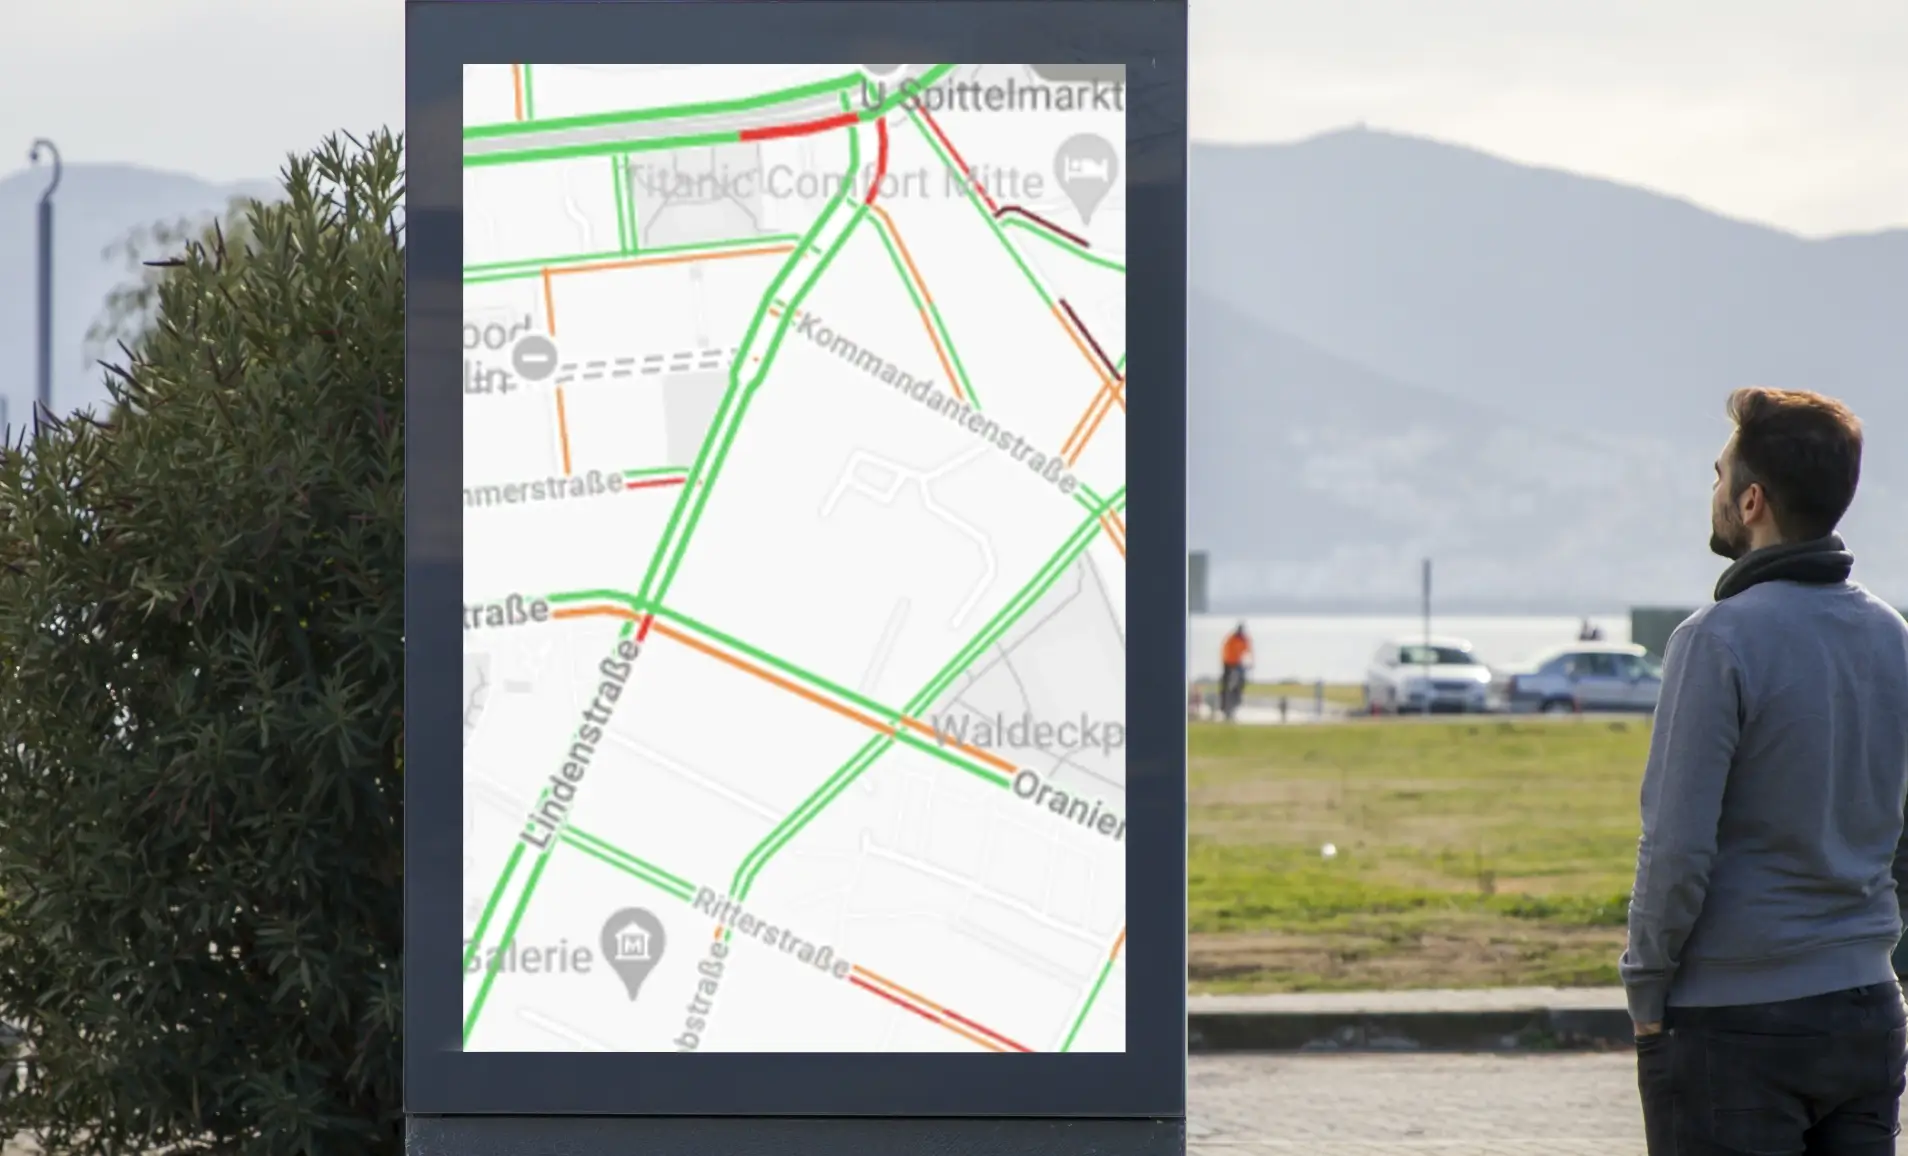 Digital signage placed at roadshow displaying live traffic data from Google Traffic app